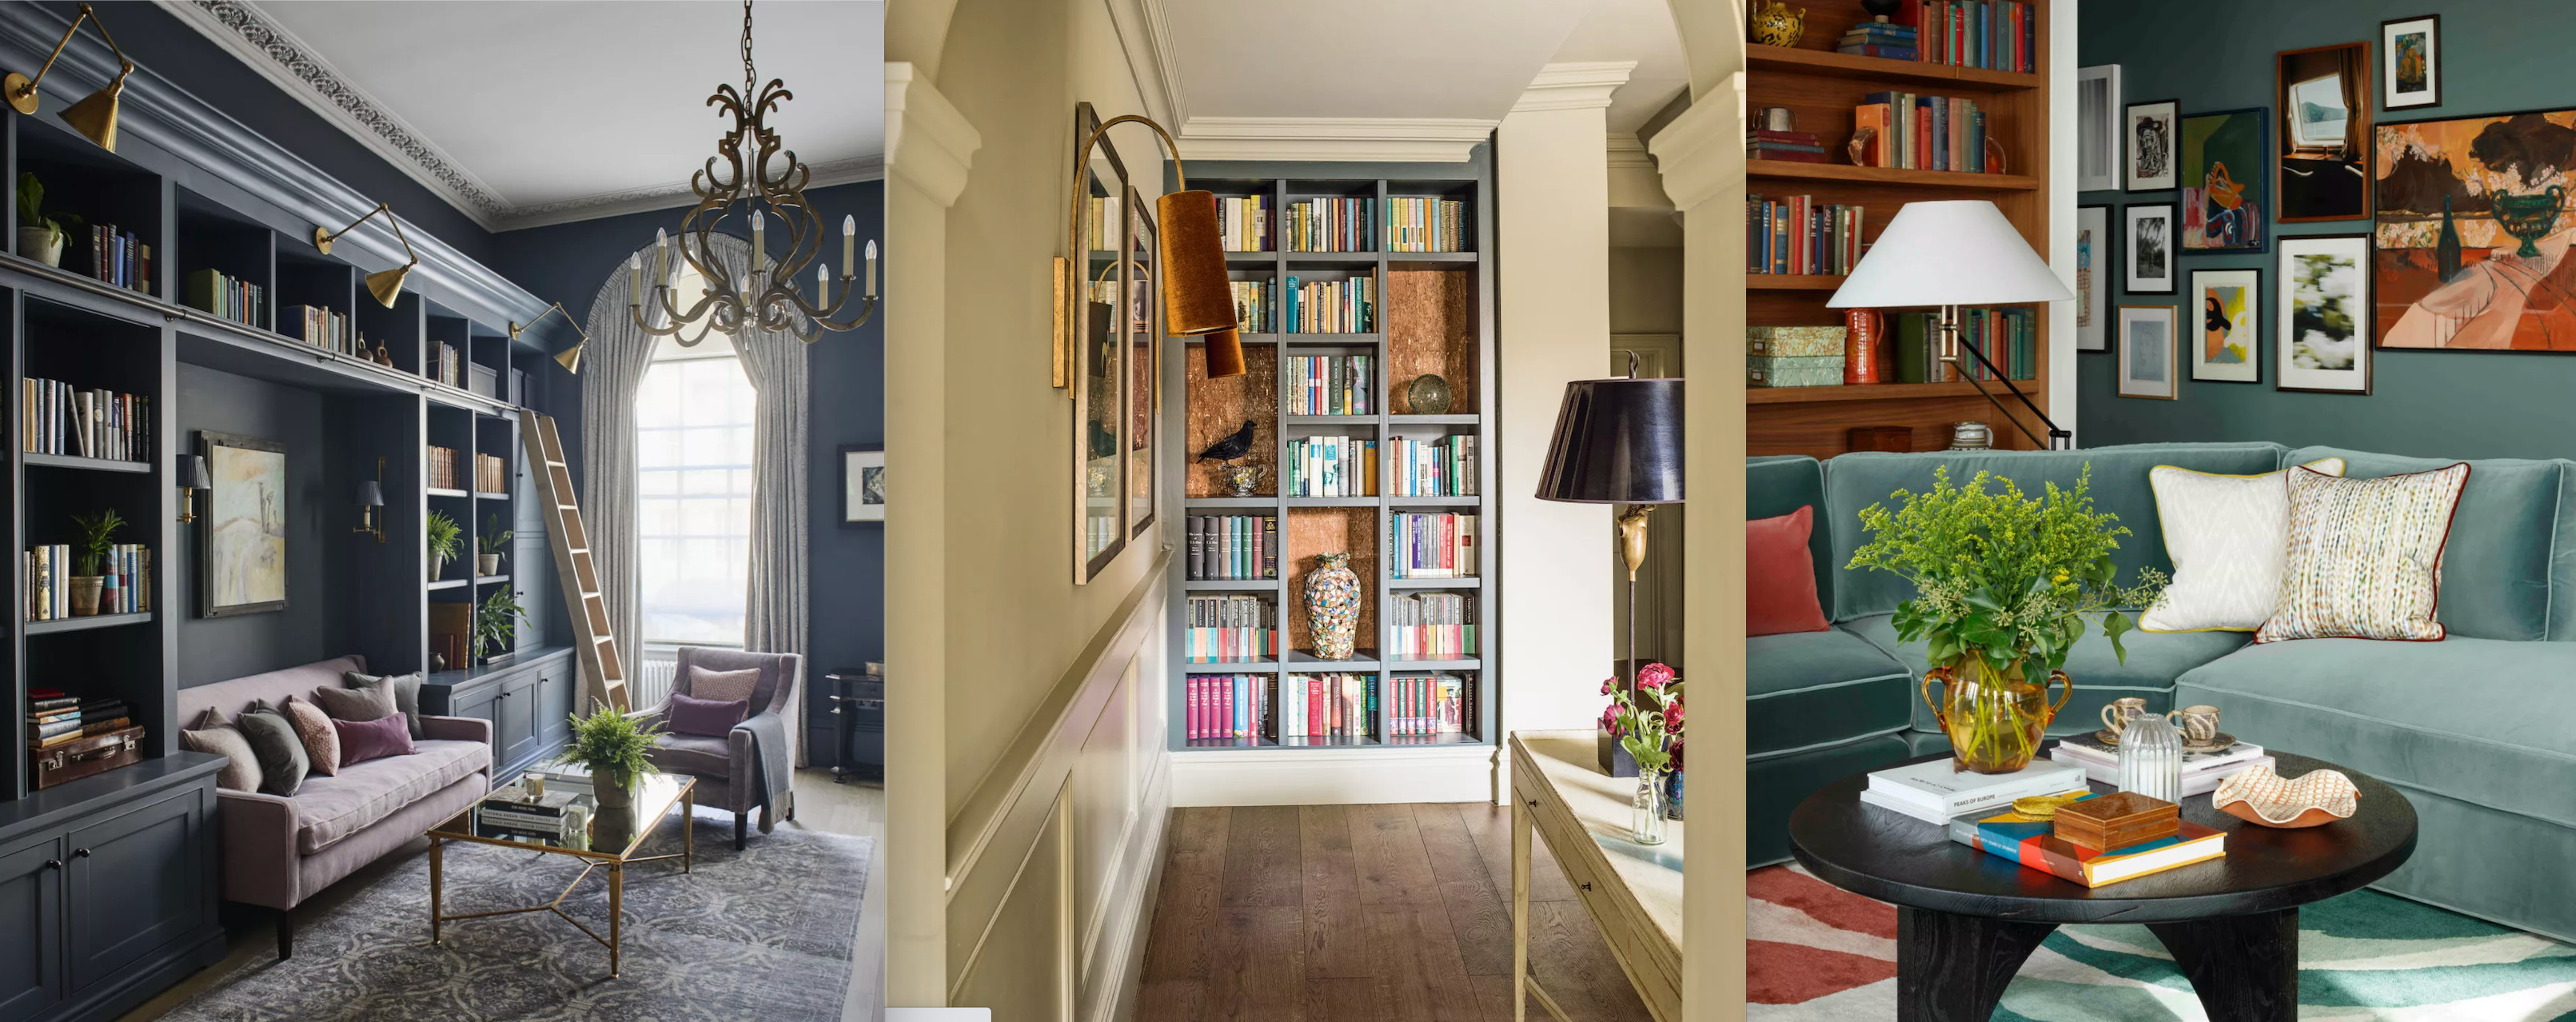 20 Book Storage Ideas: How to Store Books in Small Spaces